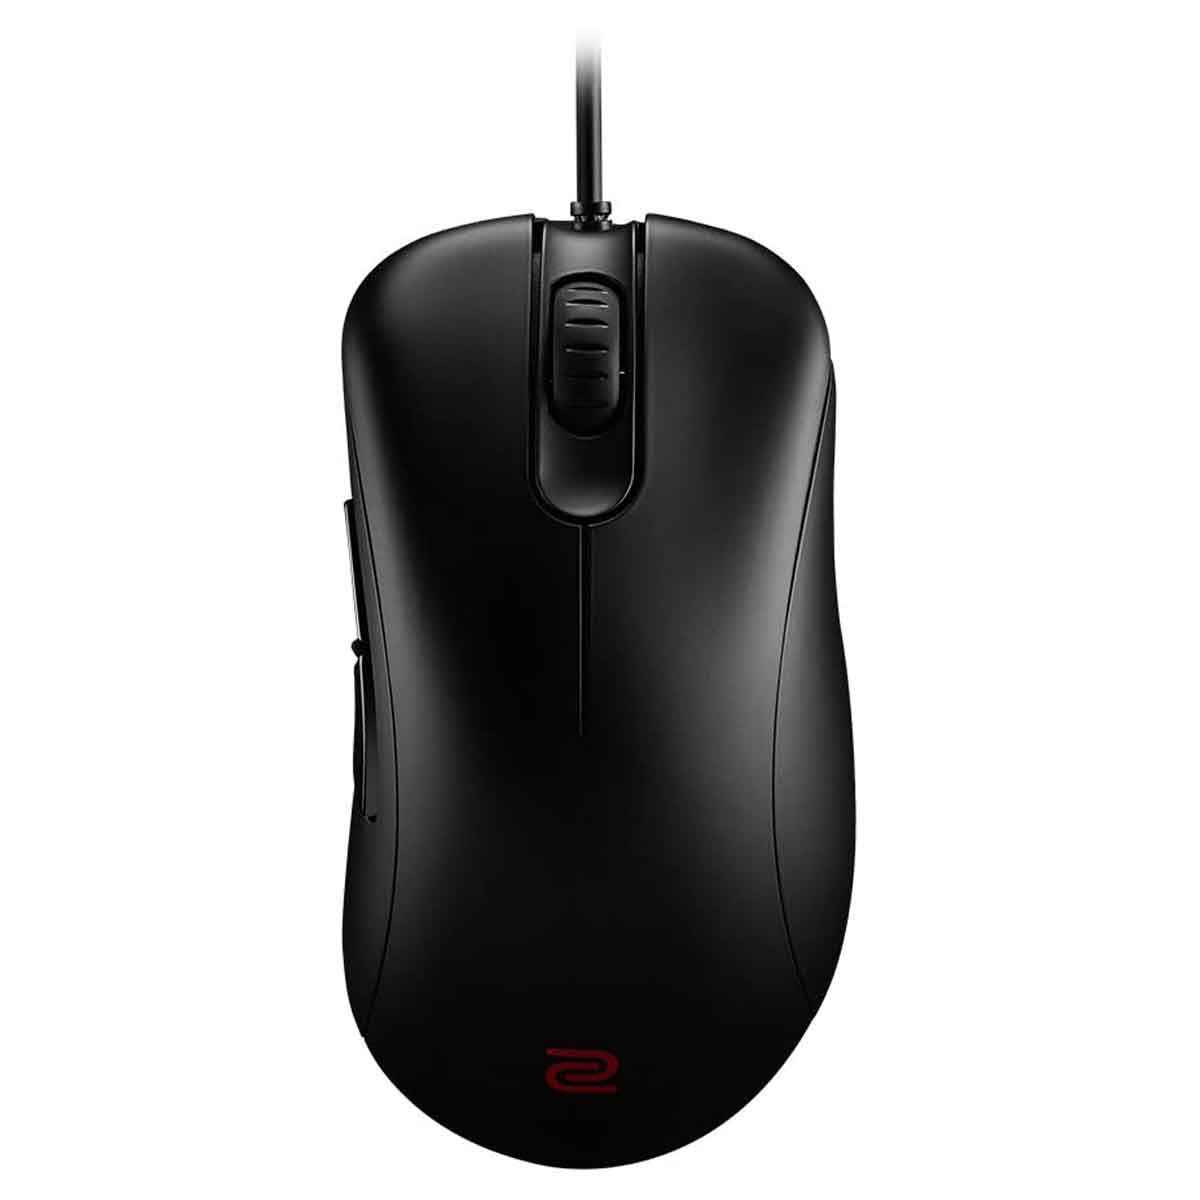 Zowie EC2-B Series Gaming mouse